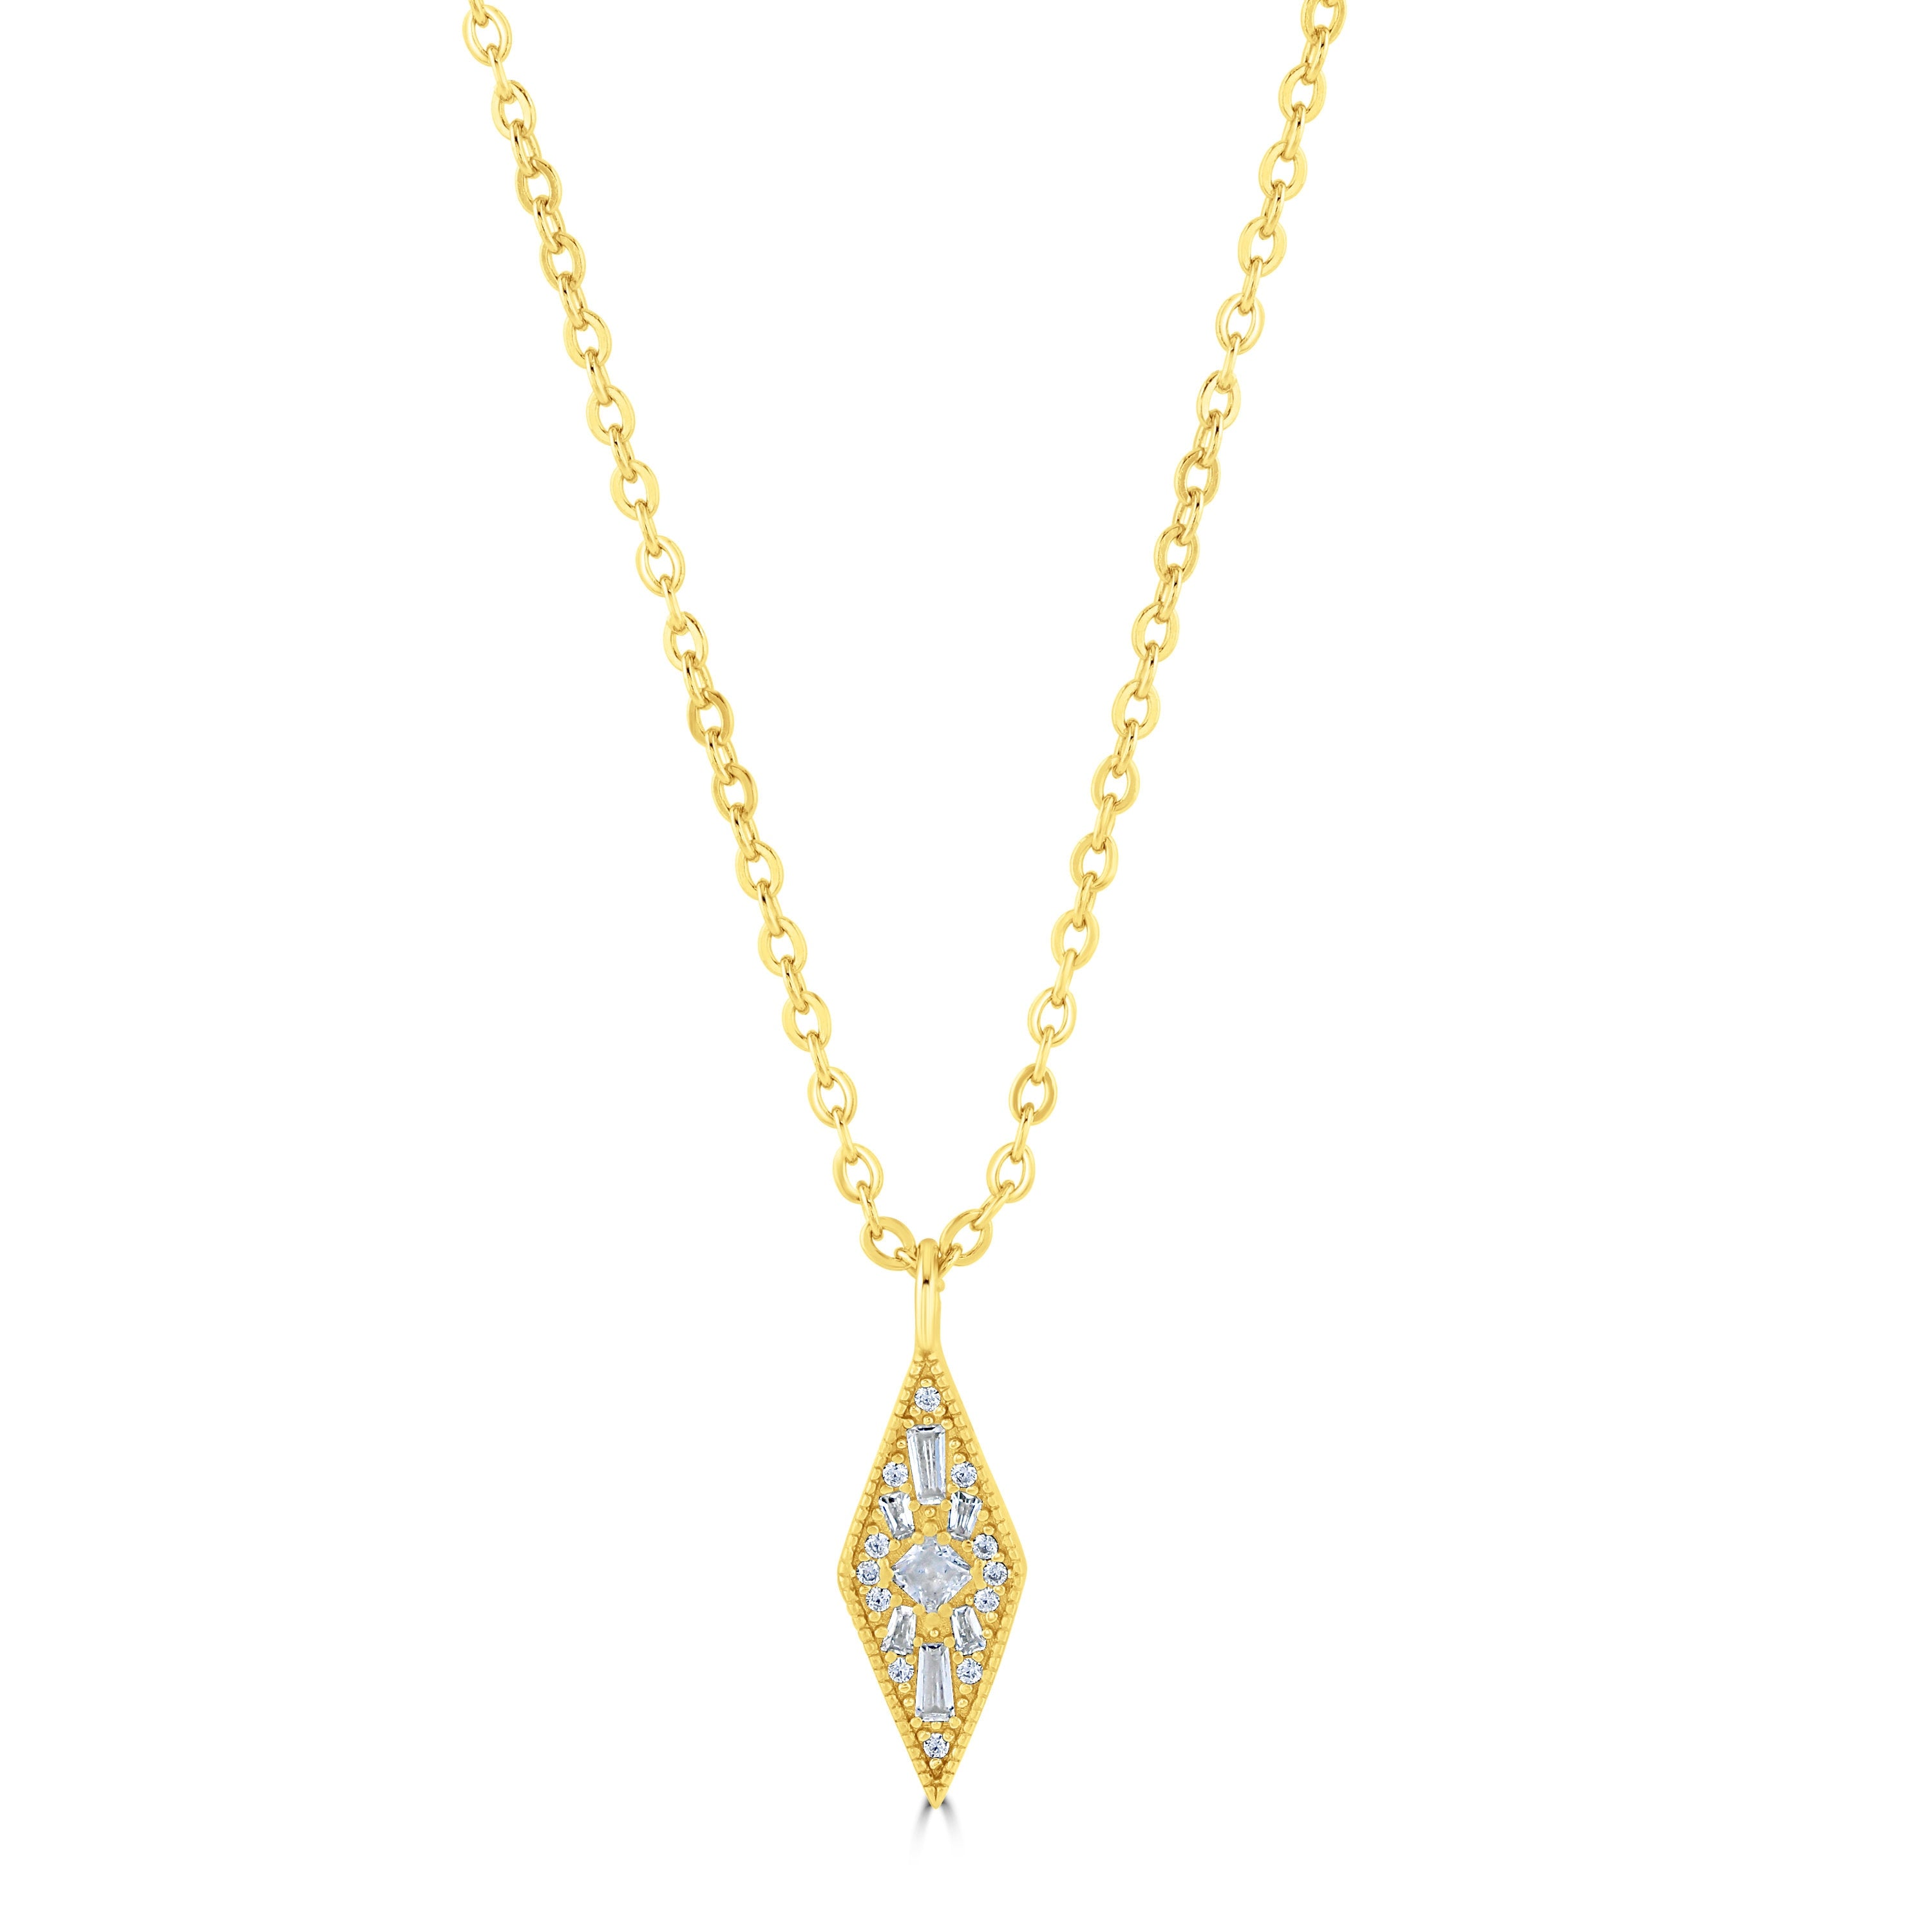 KITE NECKLACE // Dainty 14k gold plated cubic zirconia charm necklace